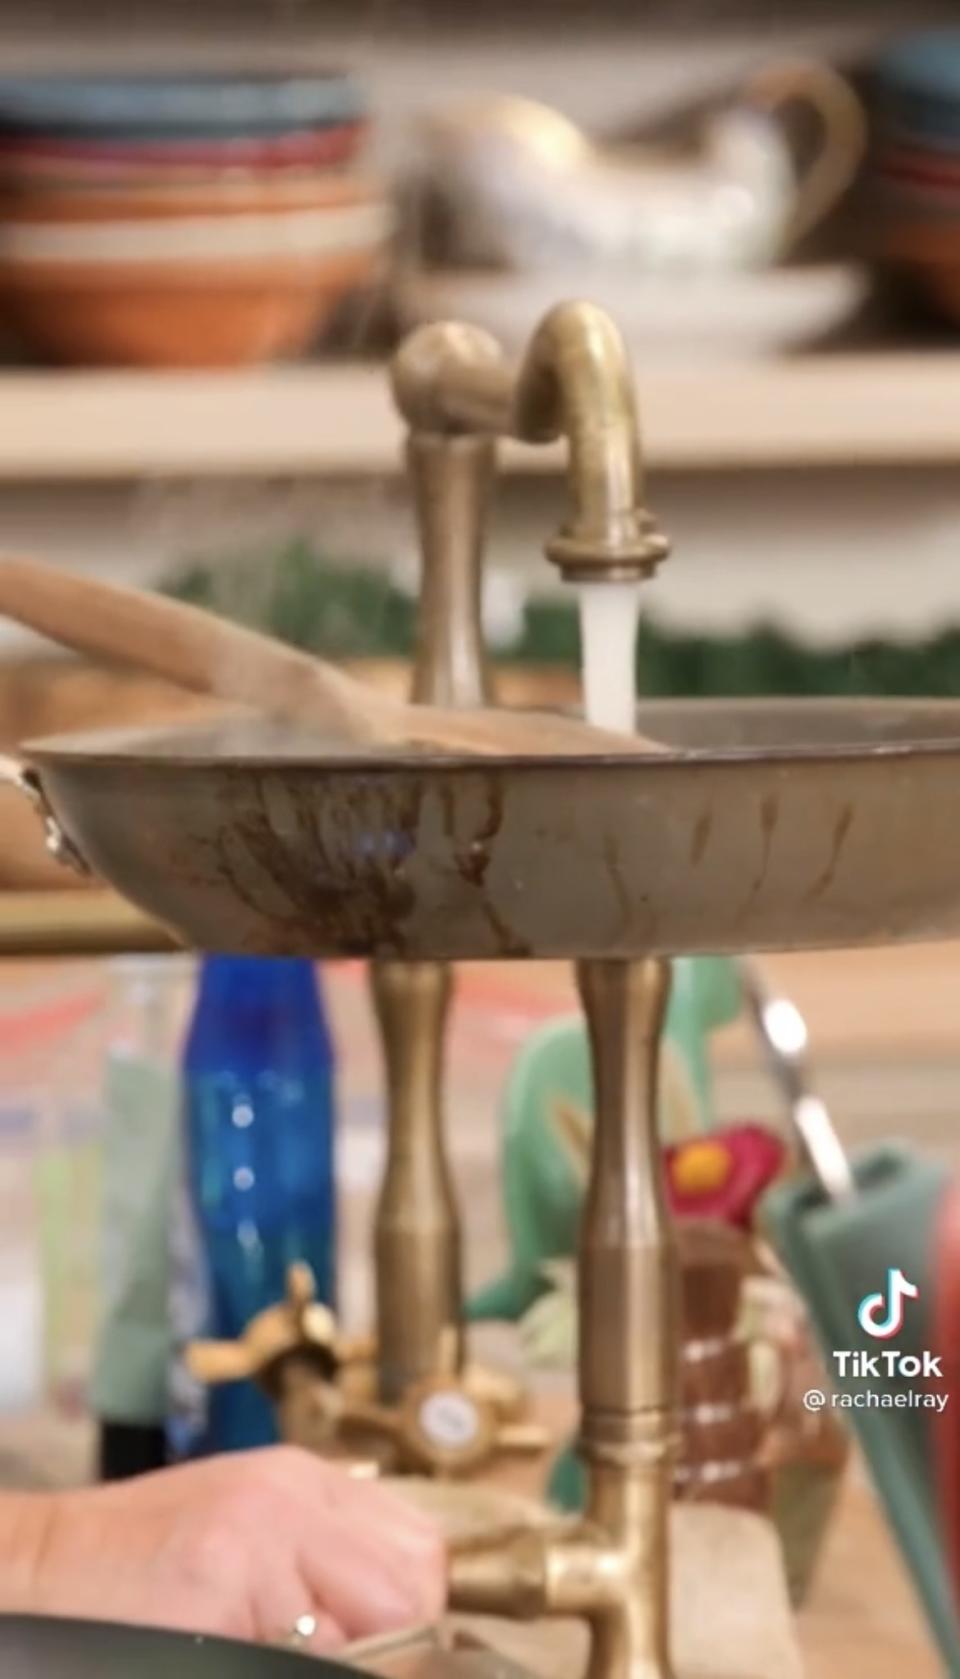 Water being poured from a sink into the skillet